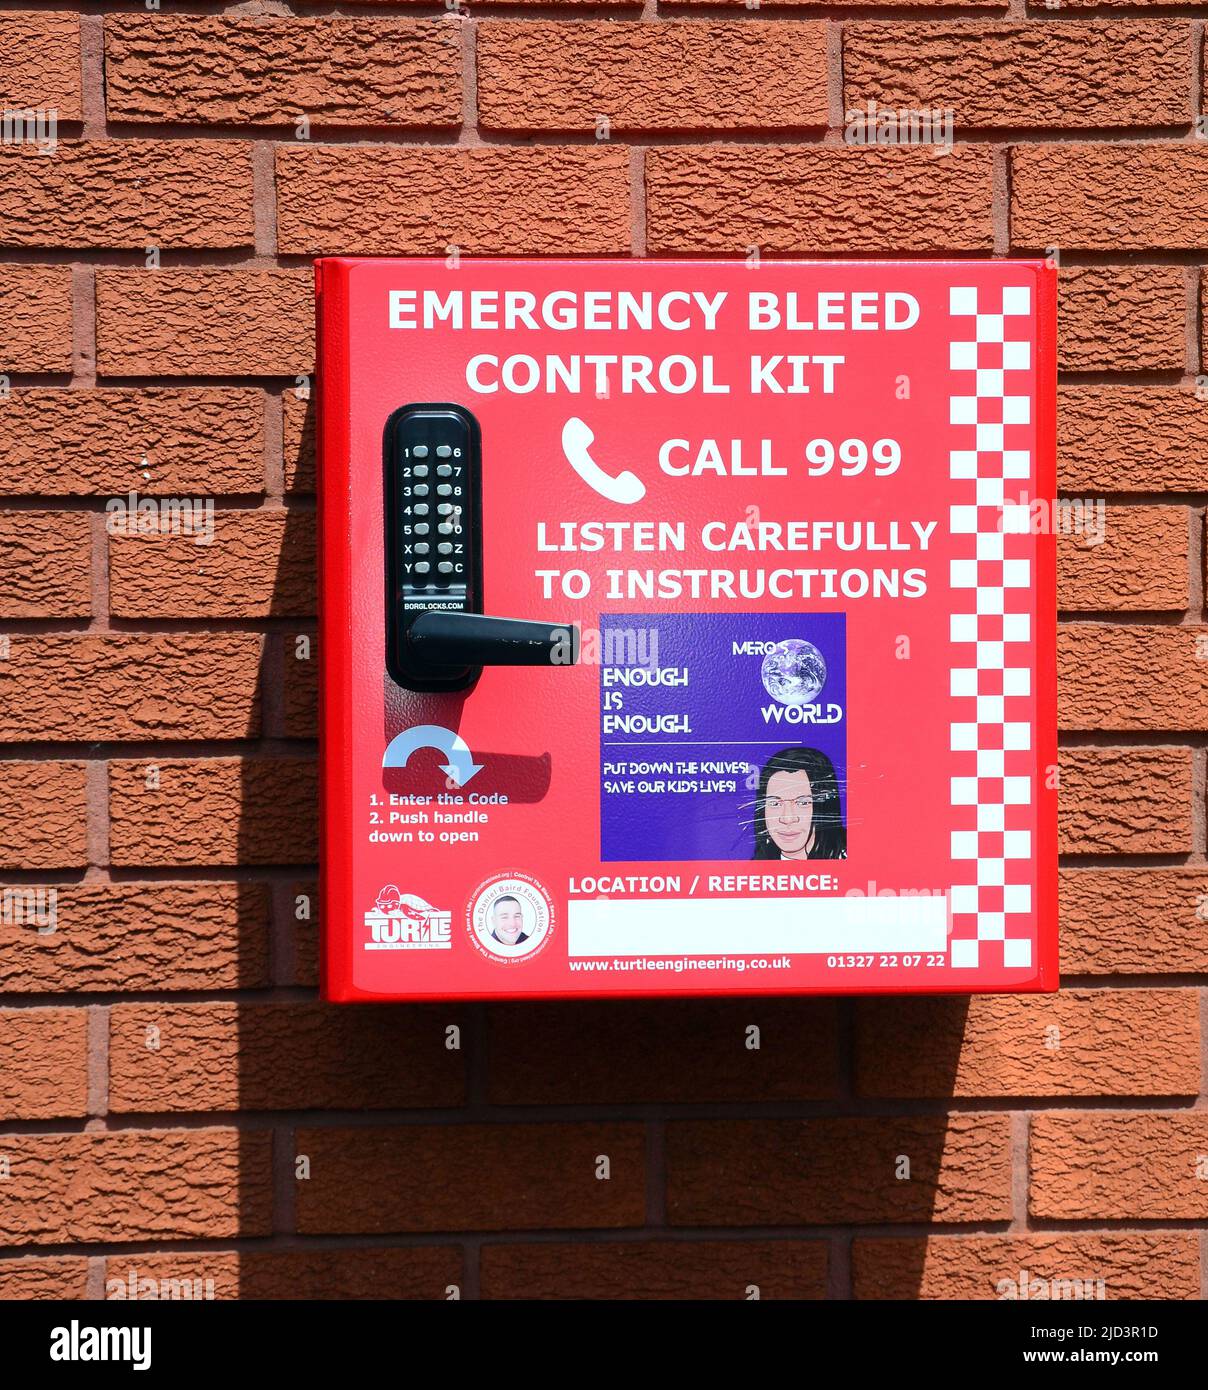 Emergency bleed control kit mounted in a red box on a brick wall with instructions on the front to call 999 emergency line in Manchester, England, UK. Stock Photo